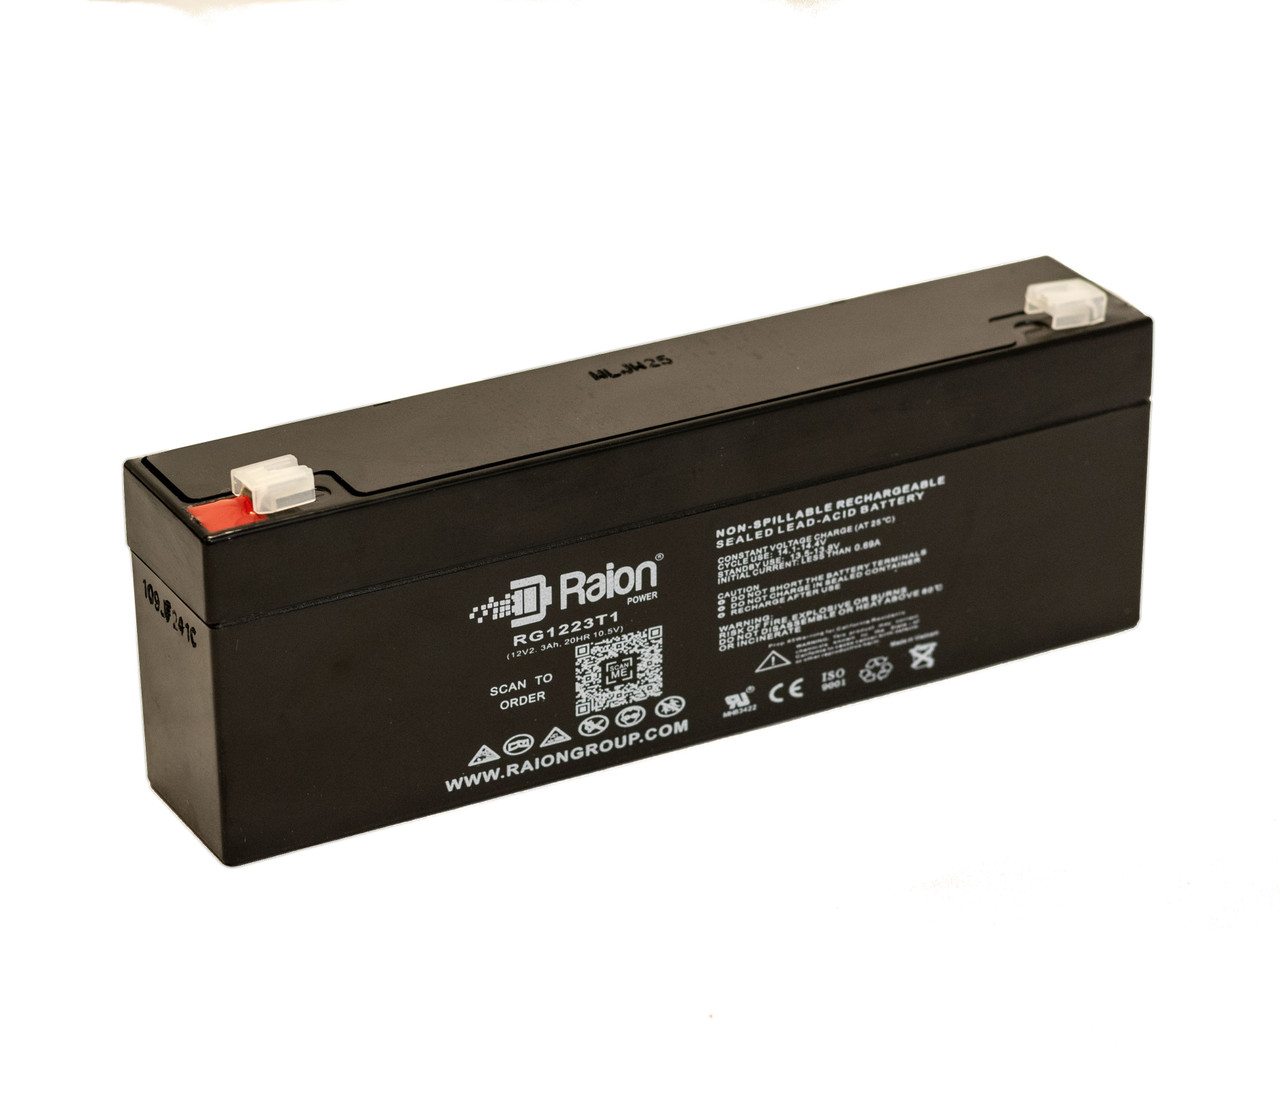 Raion Power RG1223T1 Replacement Battery for Clary Corporation UPS1500VA1G